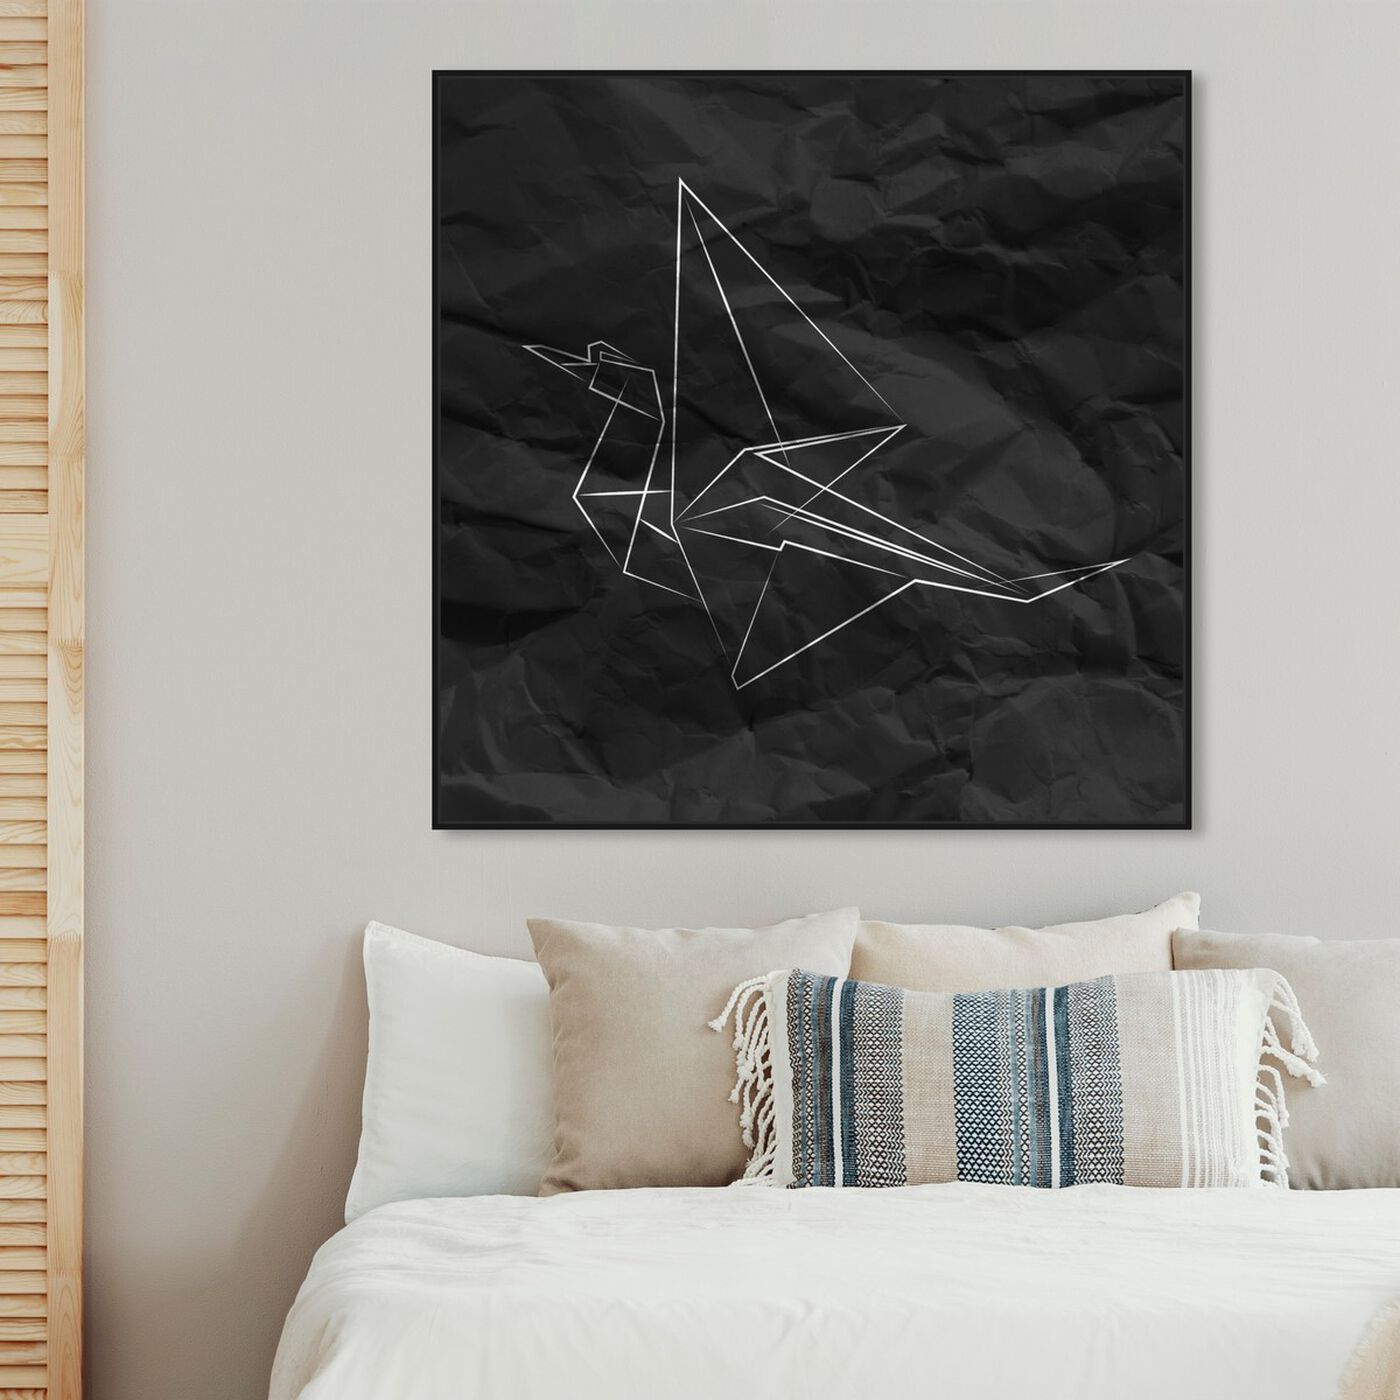 Hanging view of Origami Crane featuring abstract and geometric art.